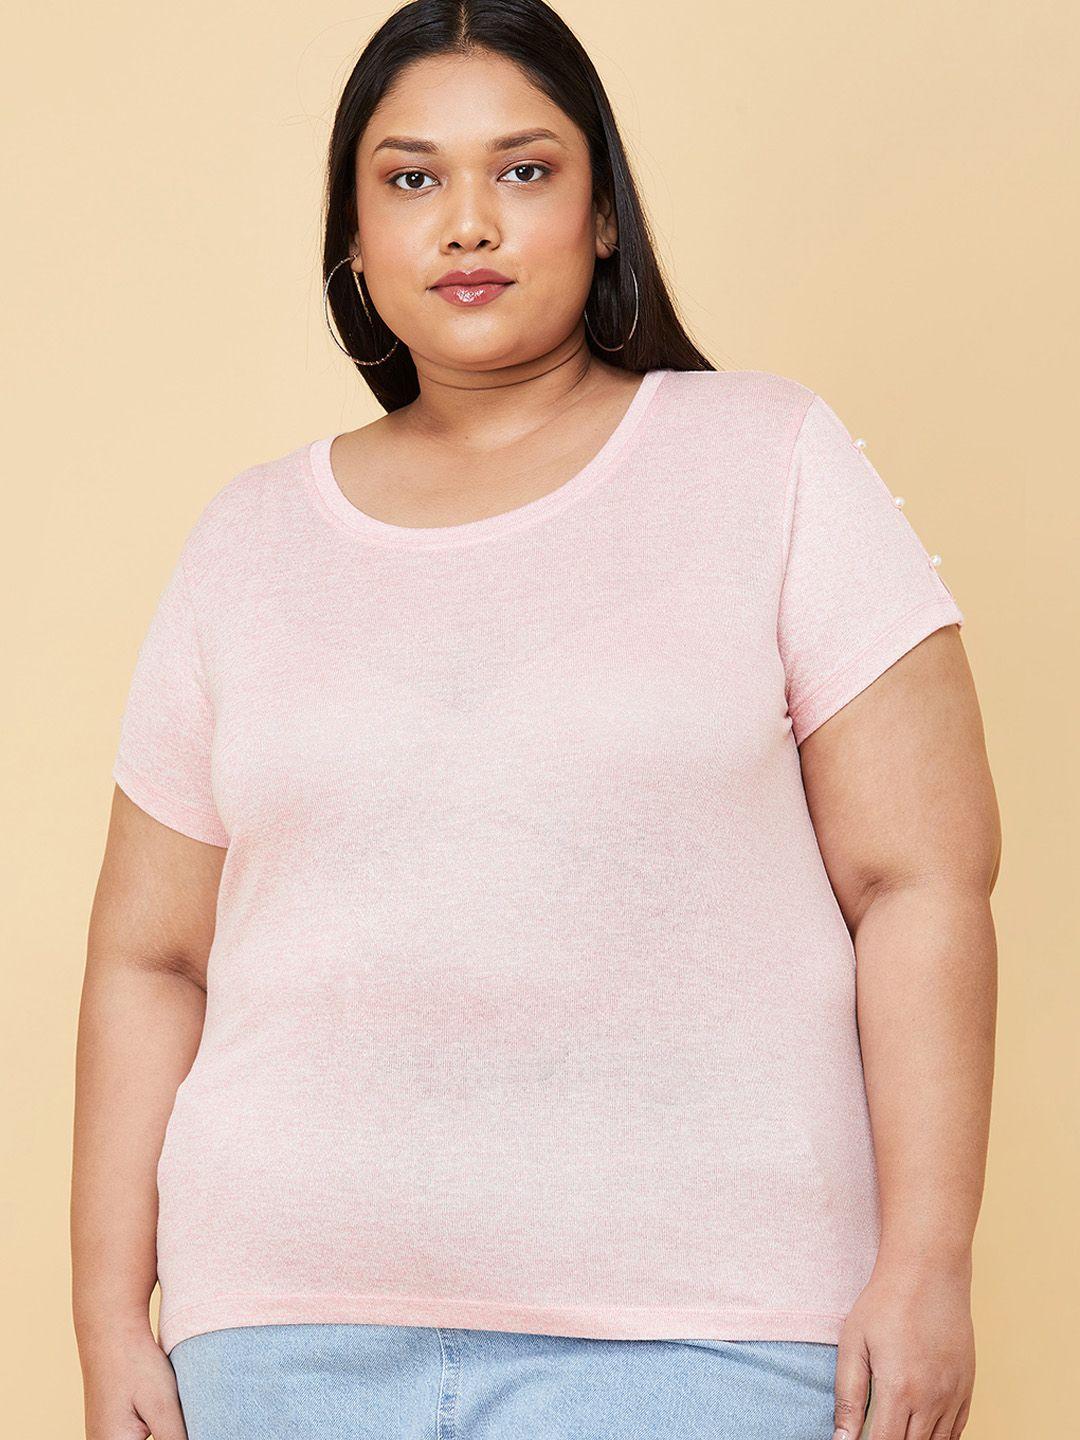 max-plus-size-women-pink-top